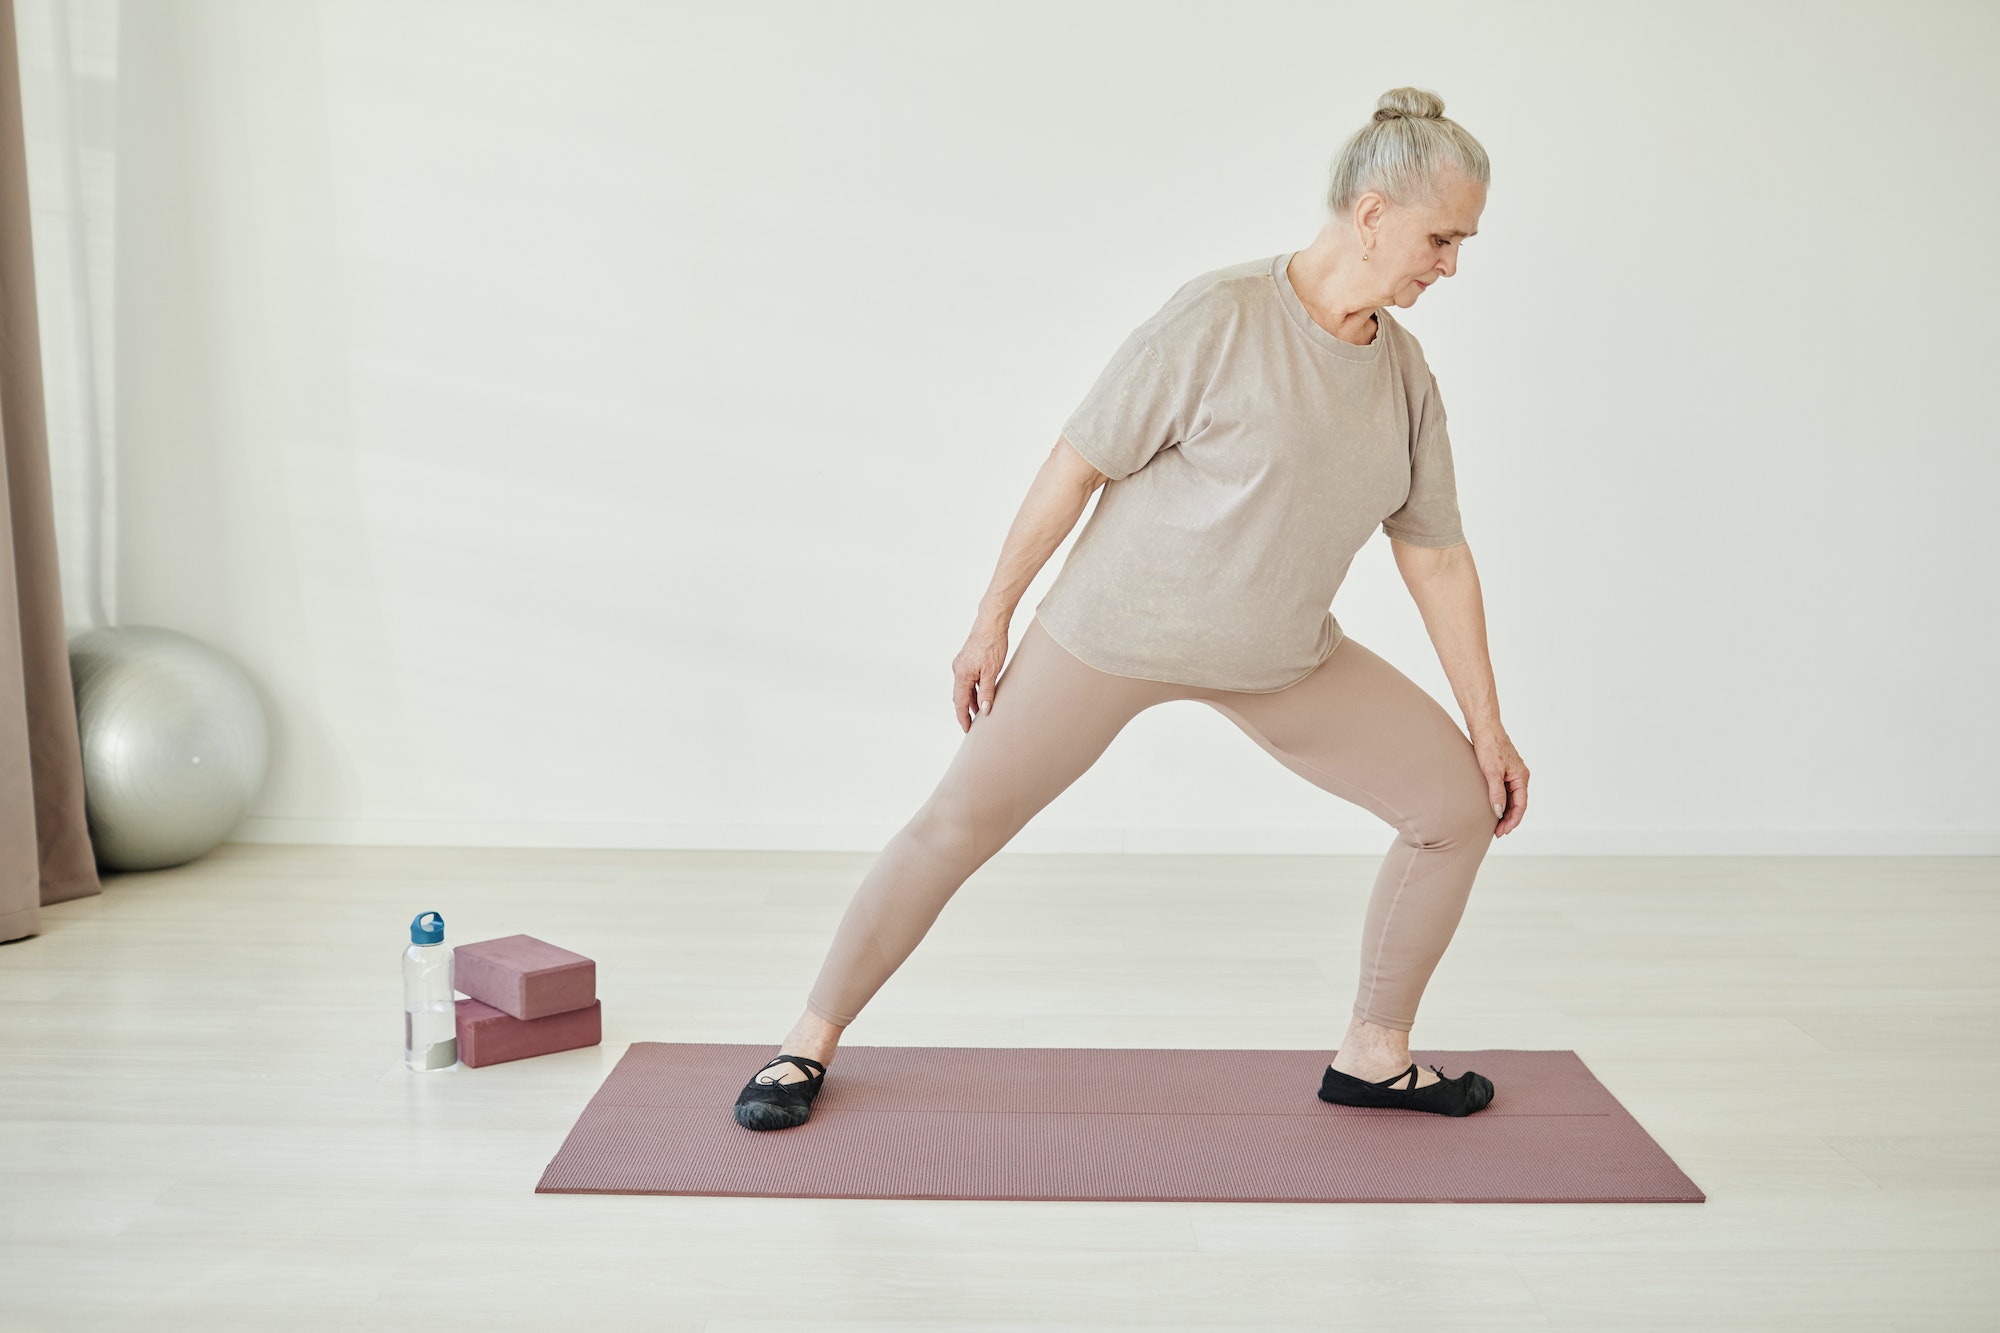 Senior woman in activewear keeping one leg bent in knee during exercise